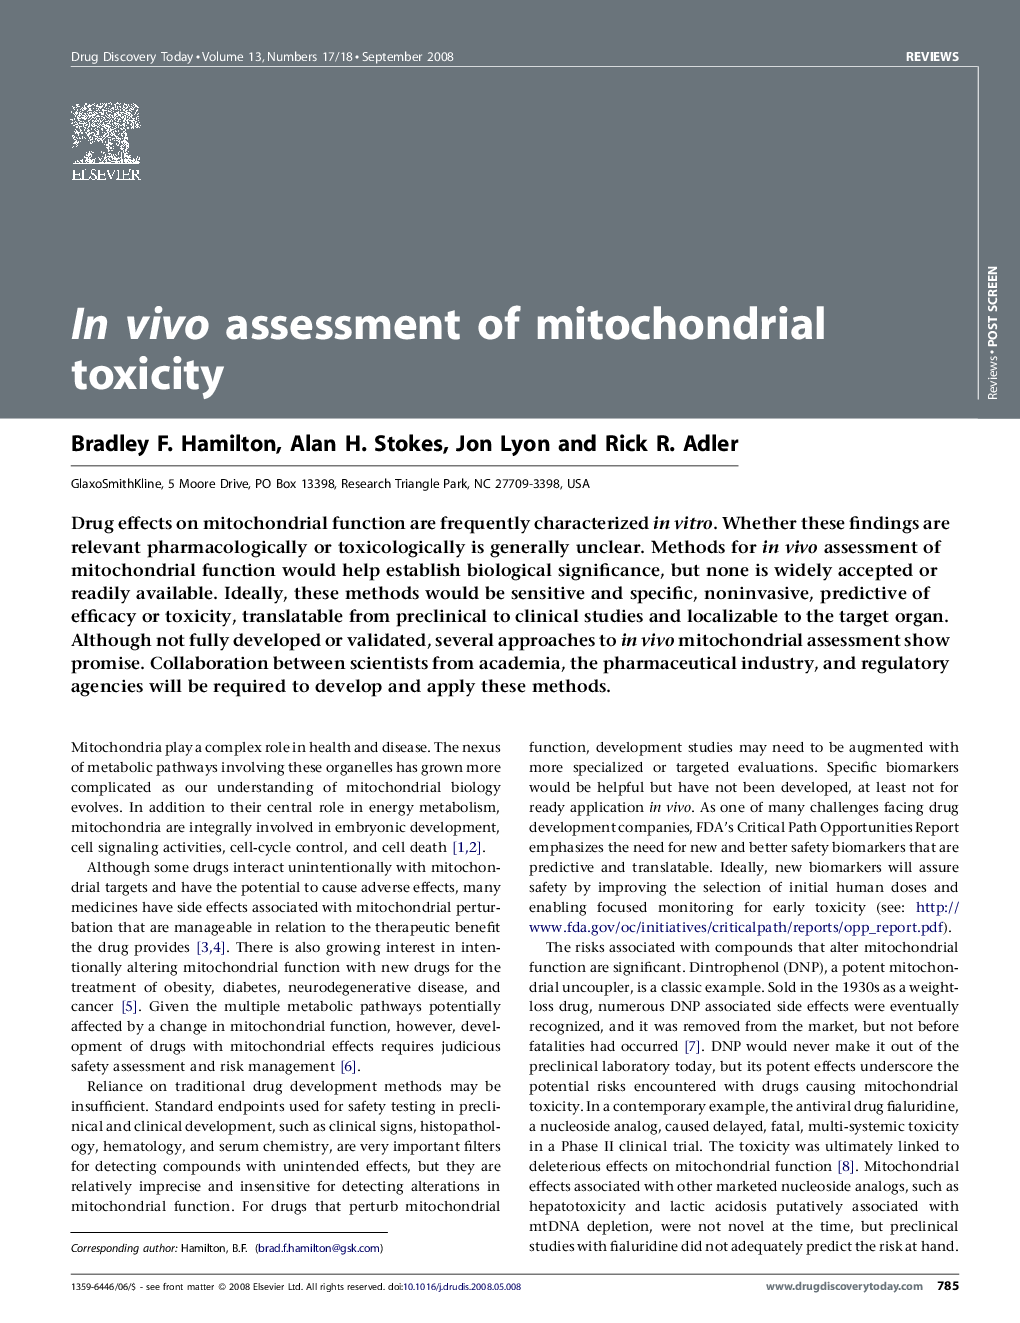 In vivo assessment of mitochondrial toxicity